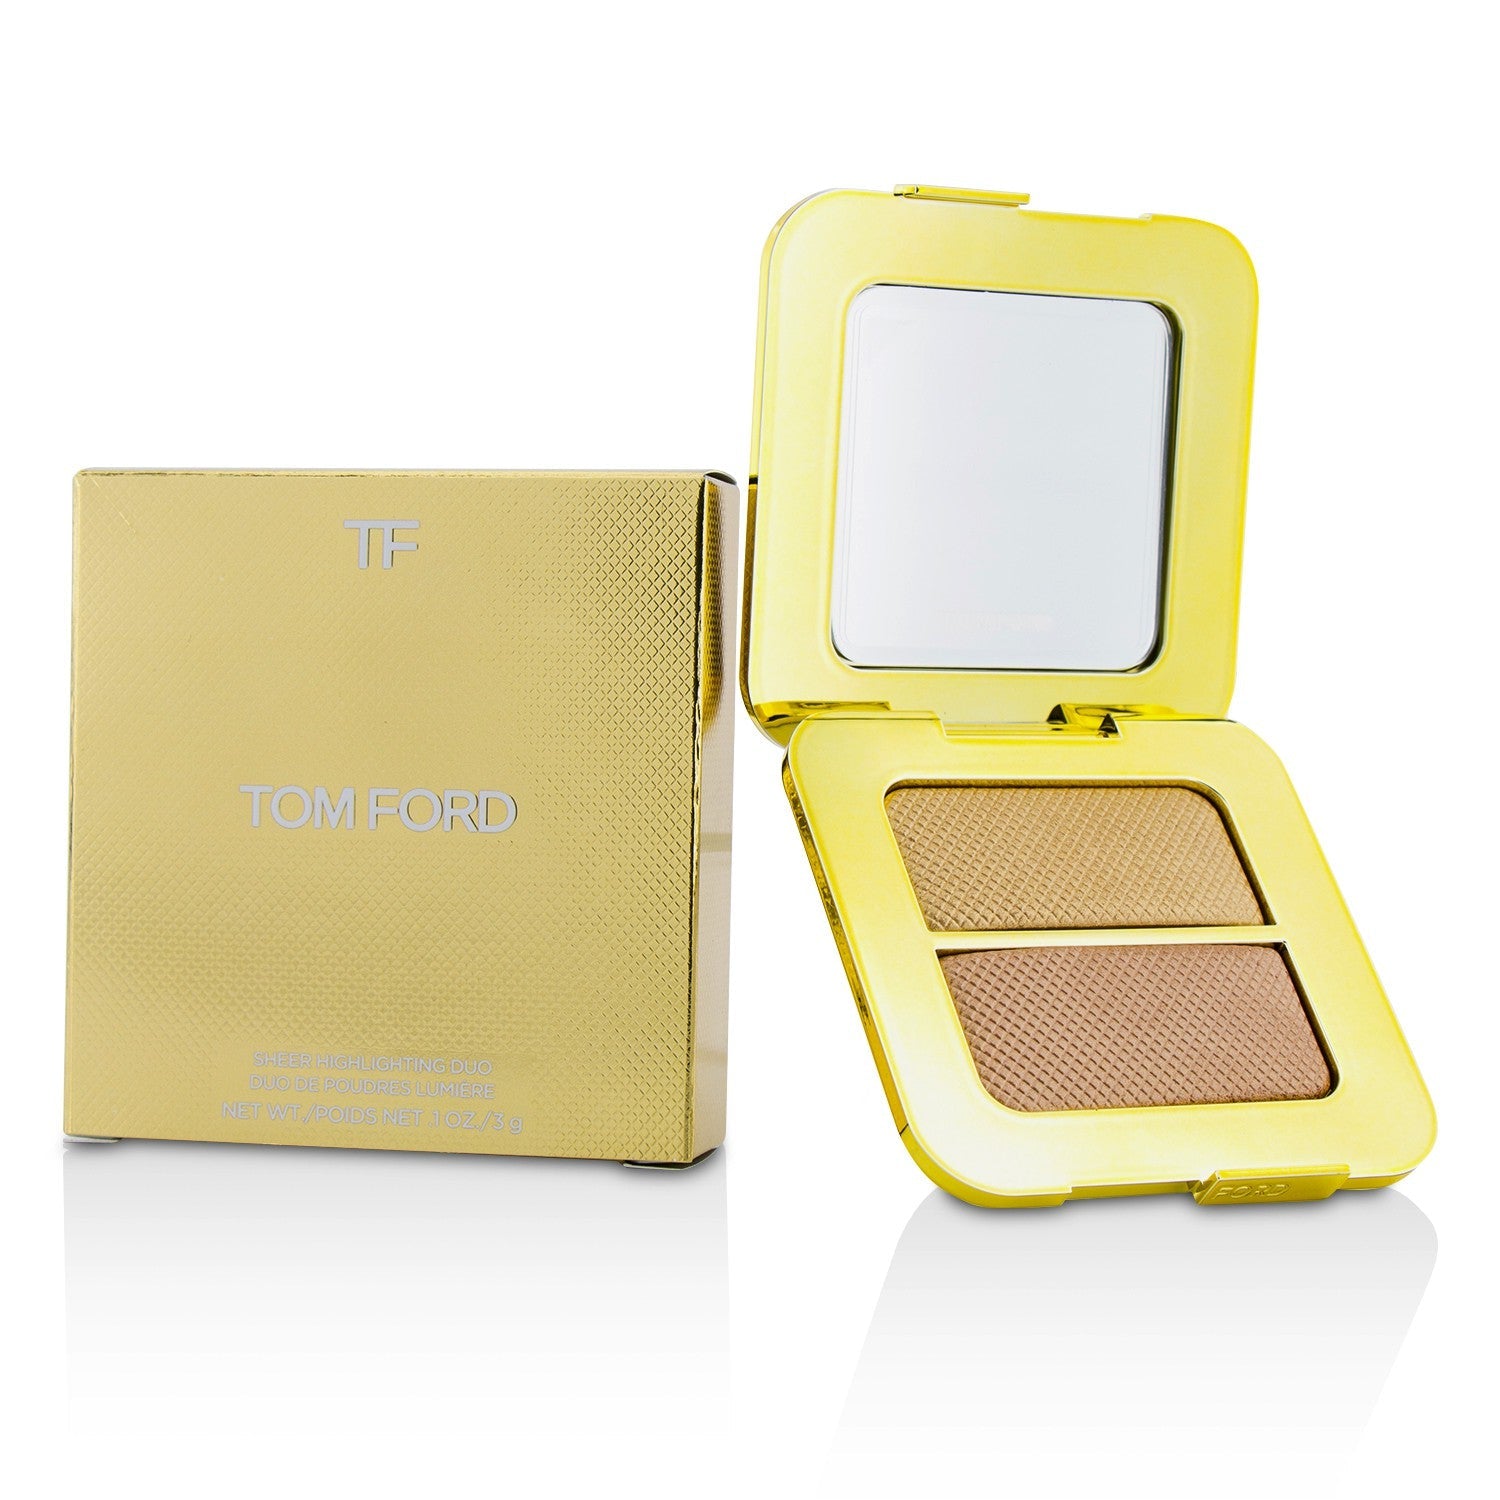 Tom Ford Sheer Highlighting Duo - # 01 Reflects Gilt 3g/ – Fresh  Beauty Co. USA